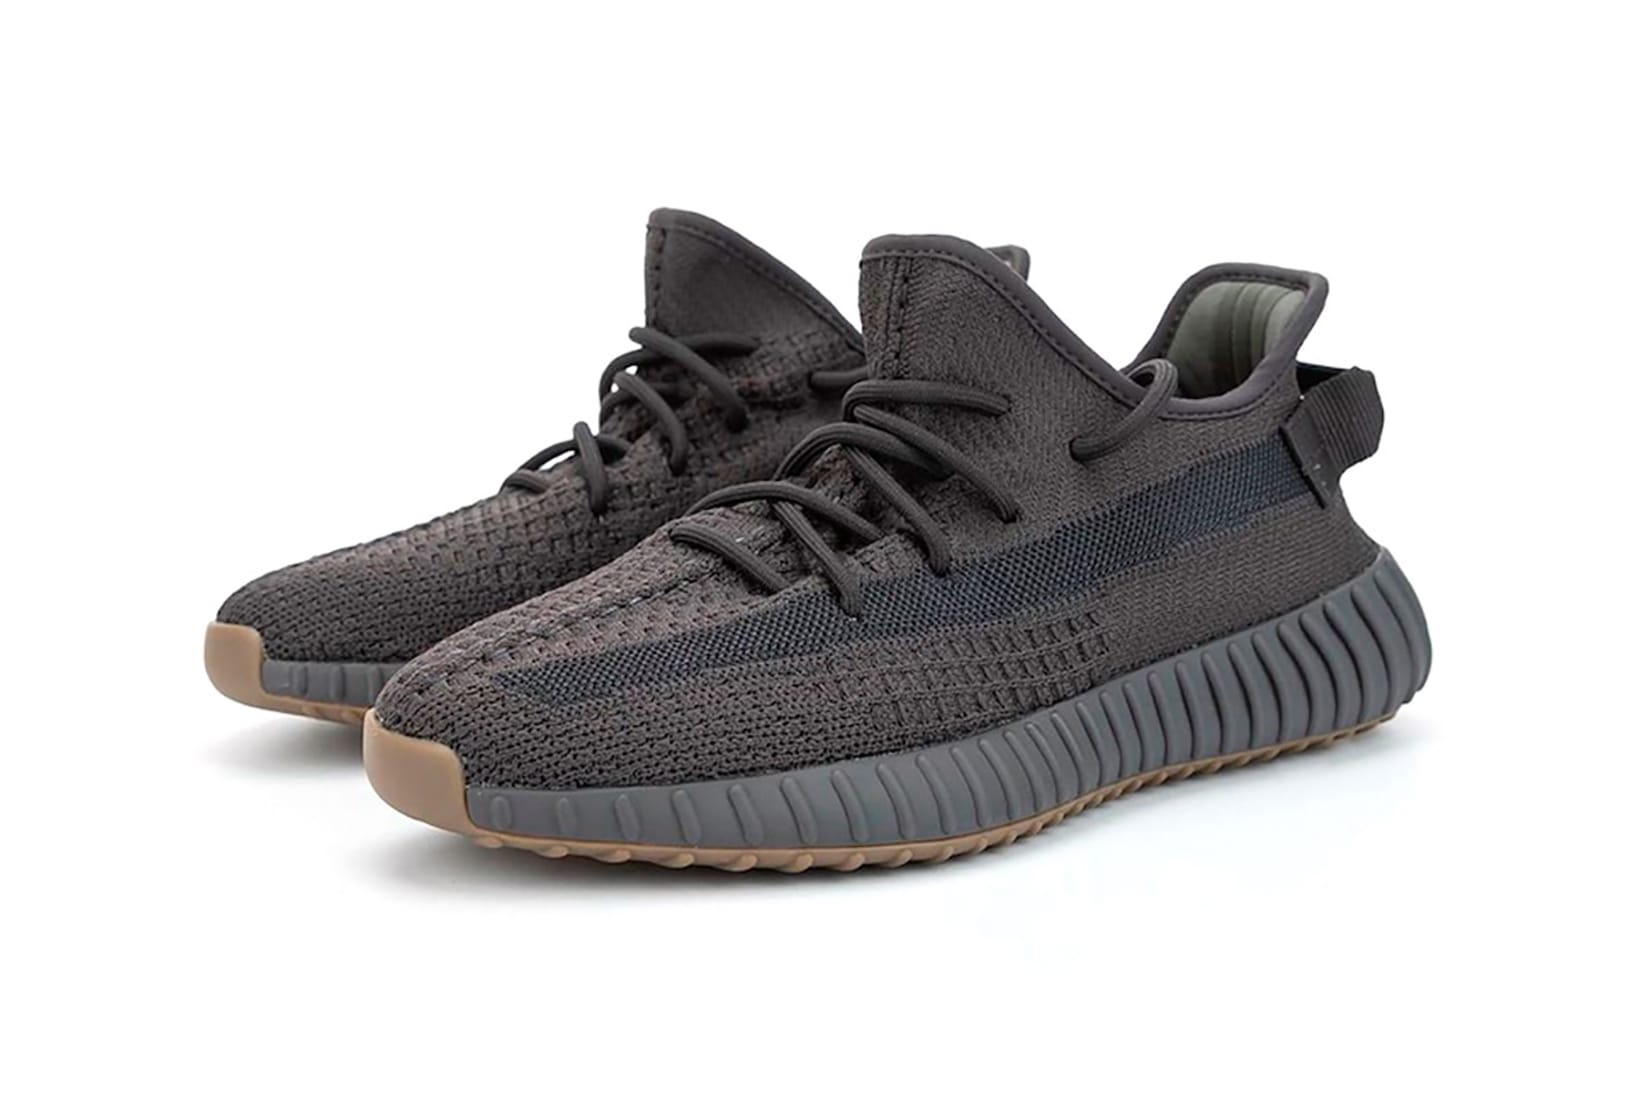 when did yeezy 350 come out